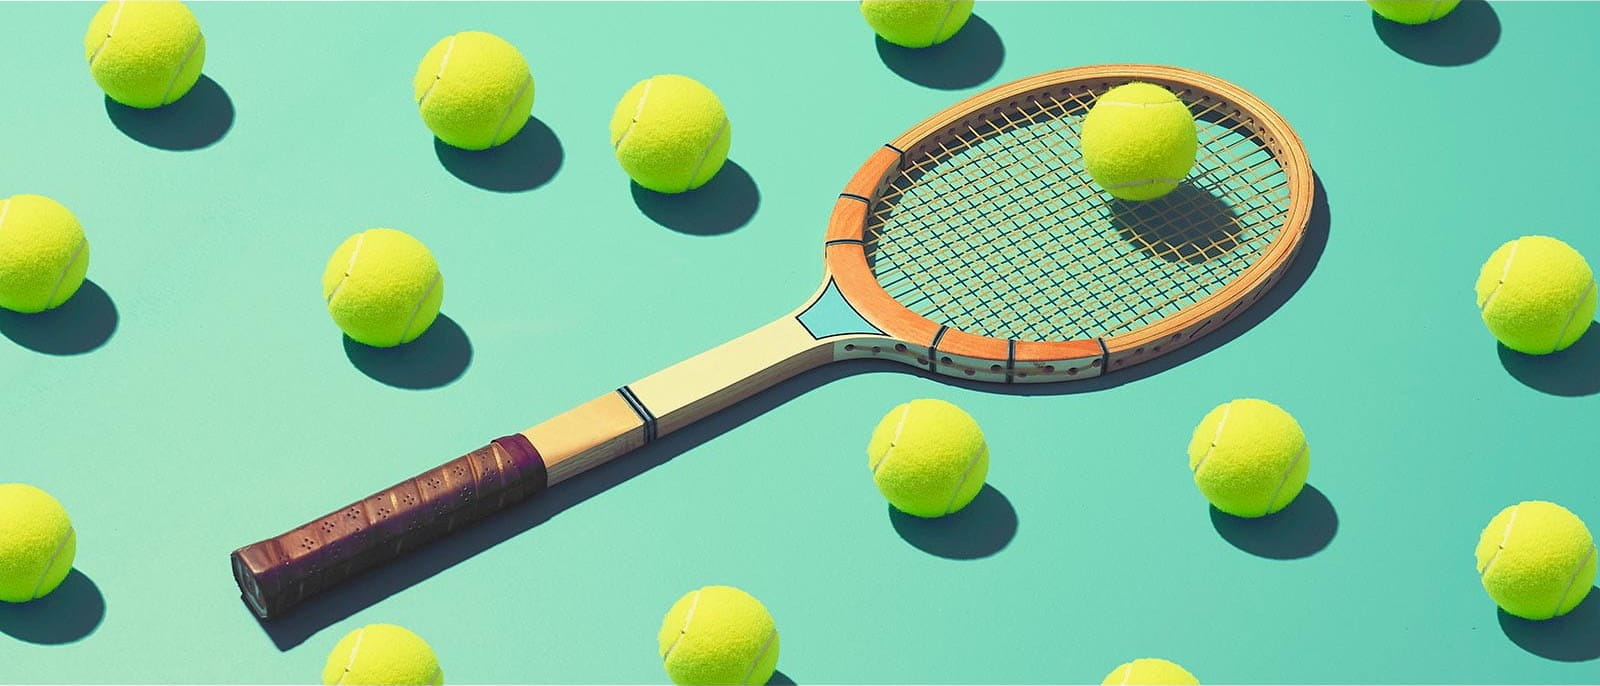 tennis racket laying on ground with multiple yellow tennis balls teal background